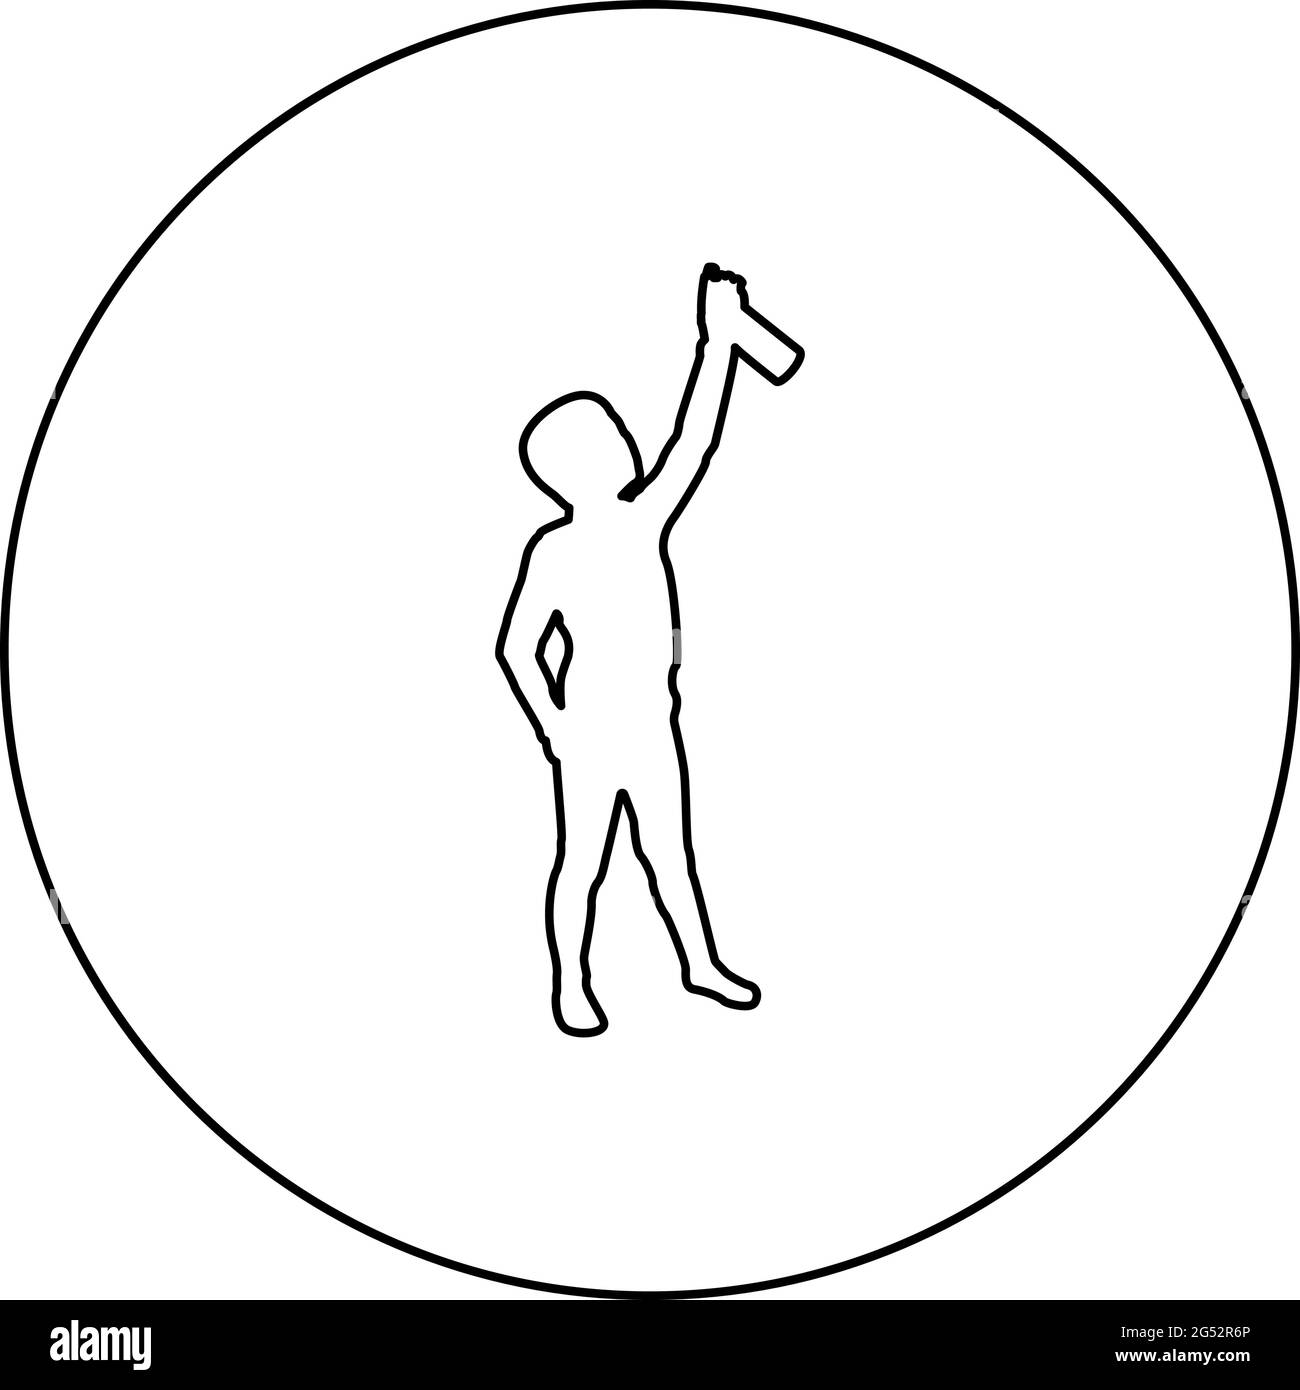 Boy using water sprayed in up Small kid watering garden using hand sprinkler Holding arm special comb  silhouette in circle round black color vector Stock Vector